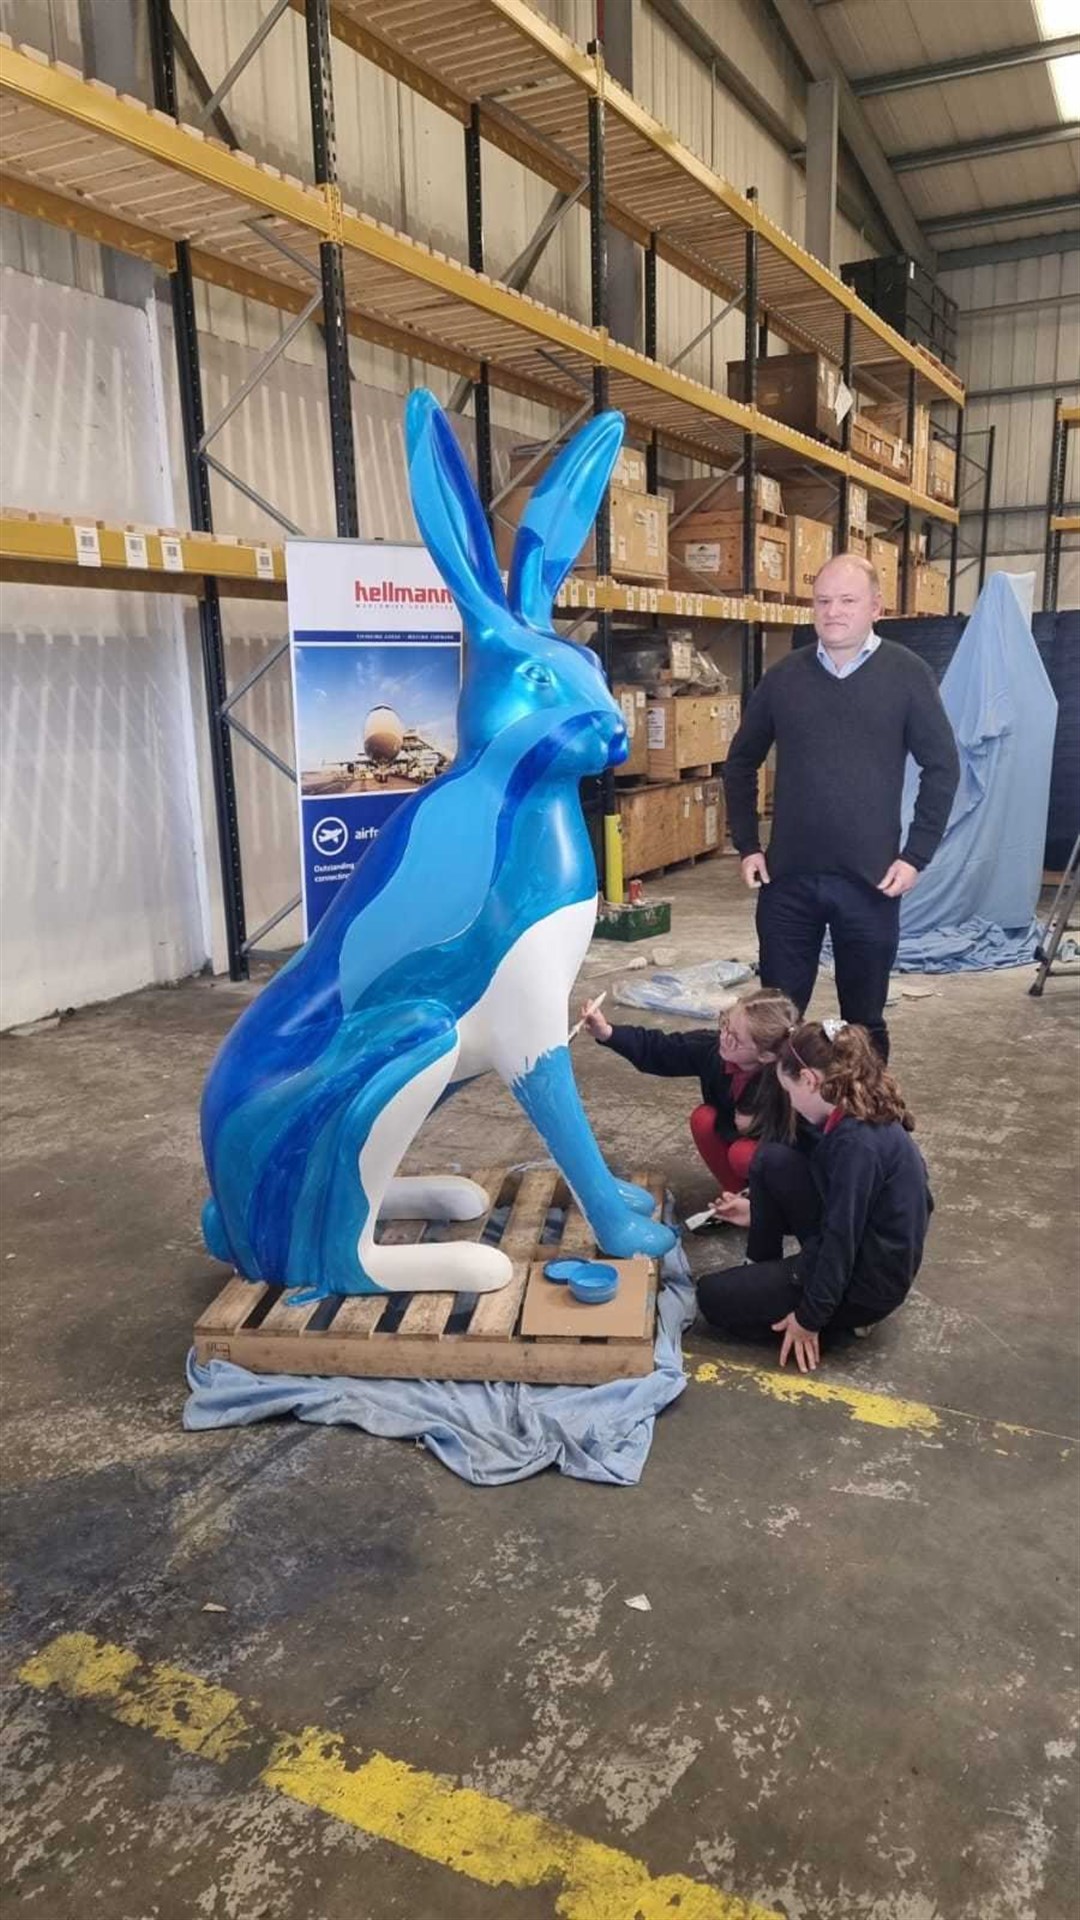 ImaginHare will be located in Turriff at the boating pond.